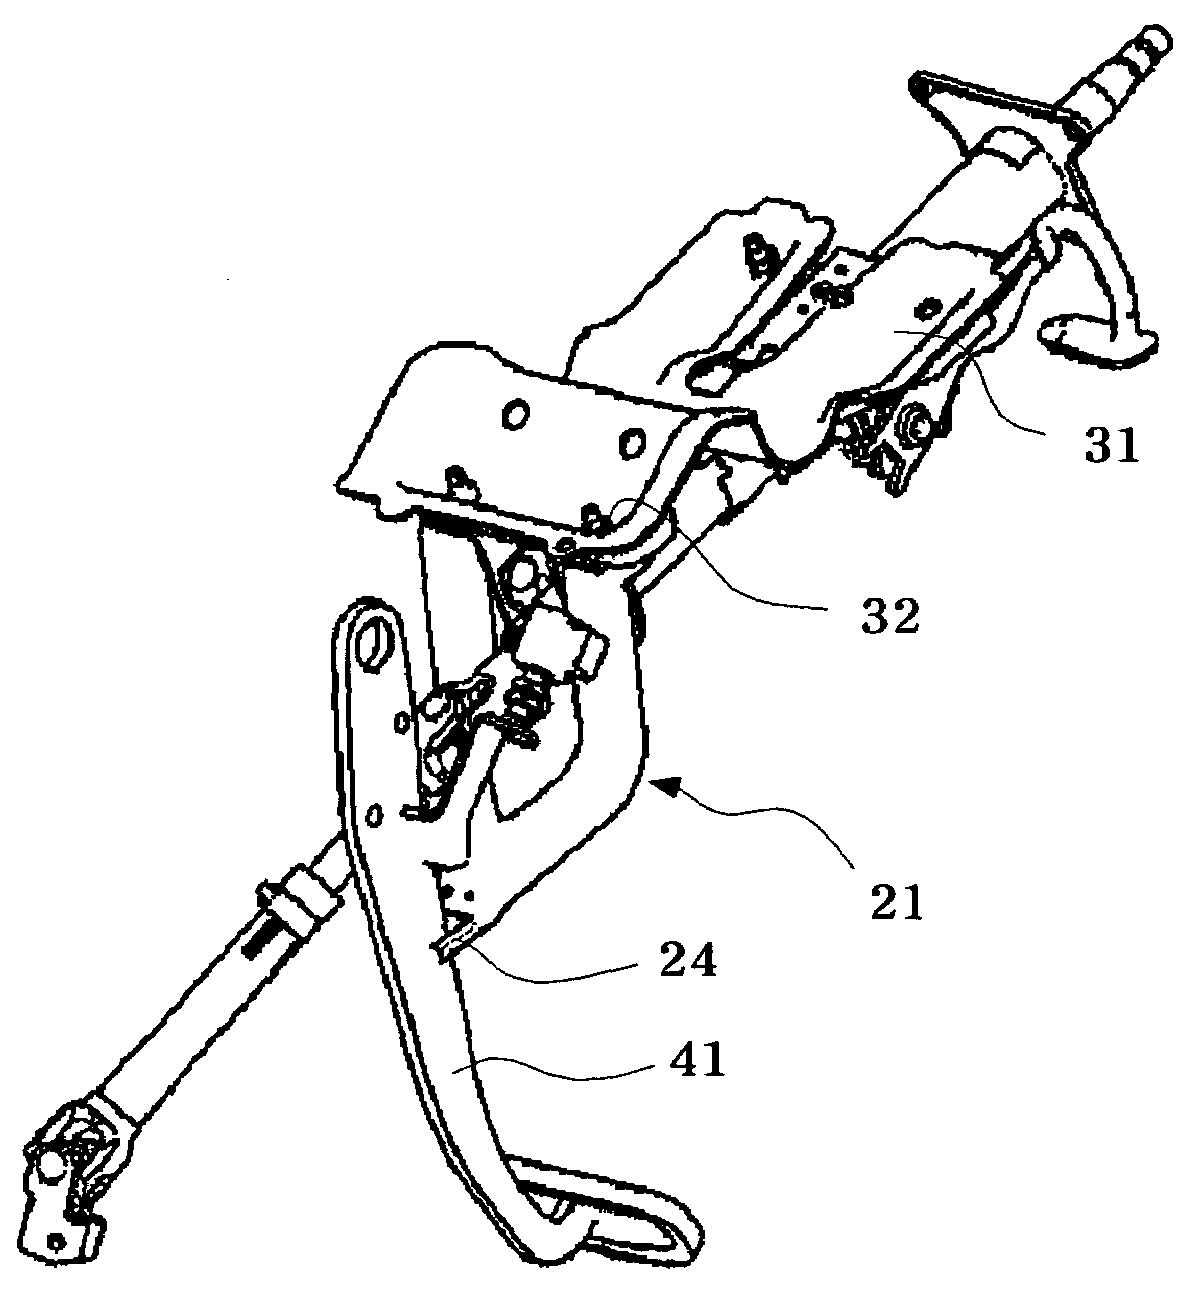 Structure for protecting brake pedal from impact